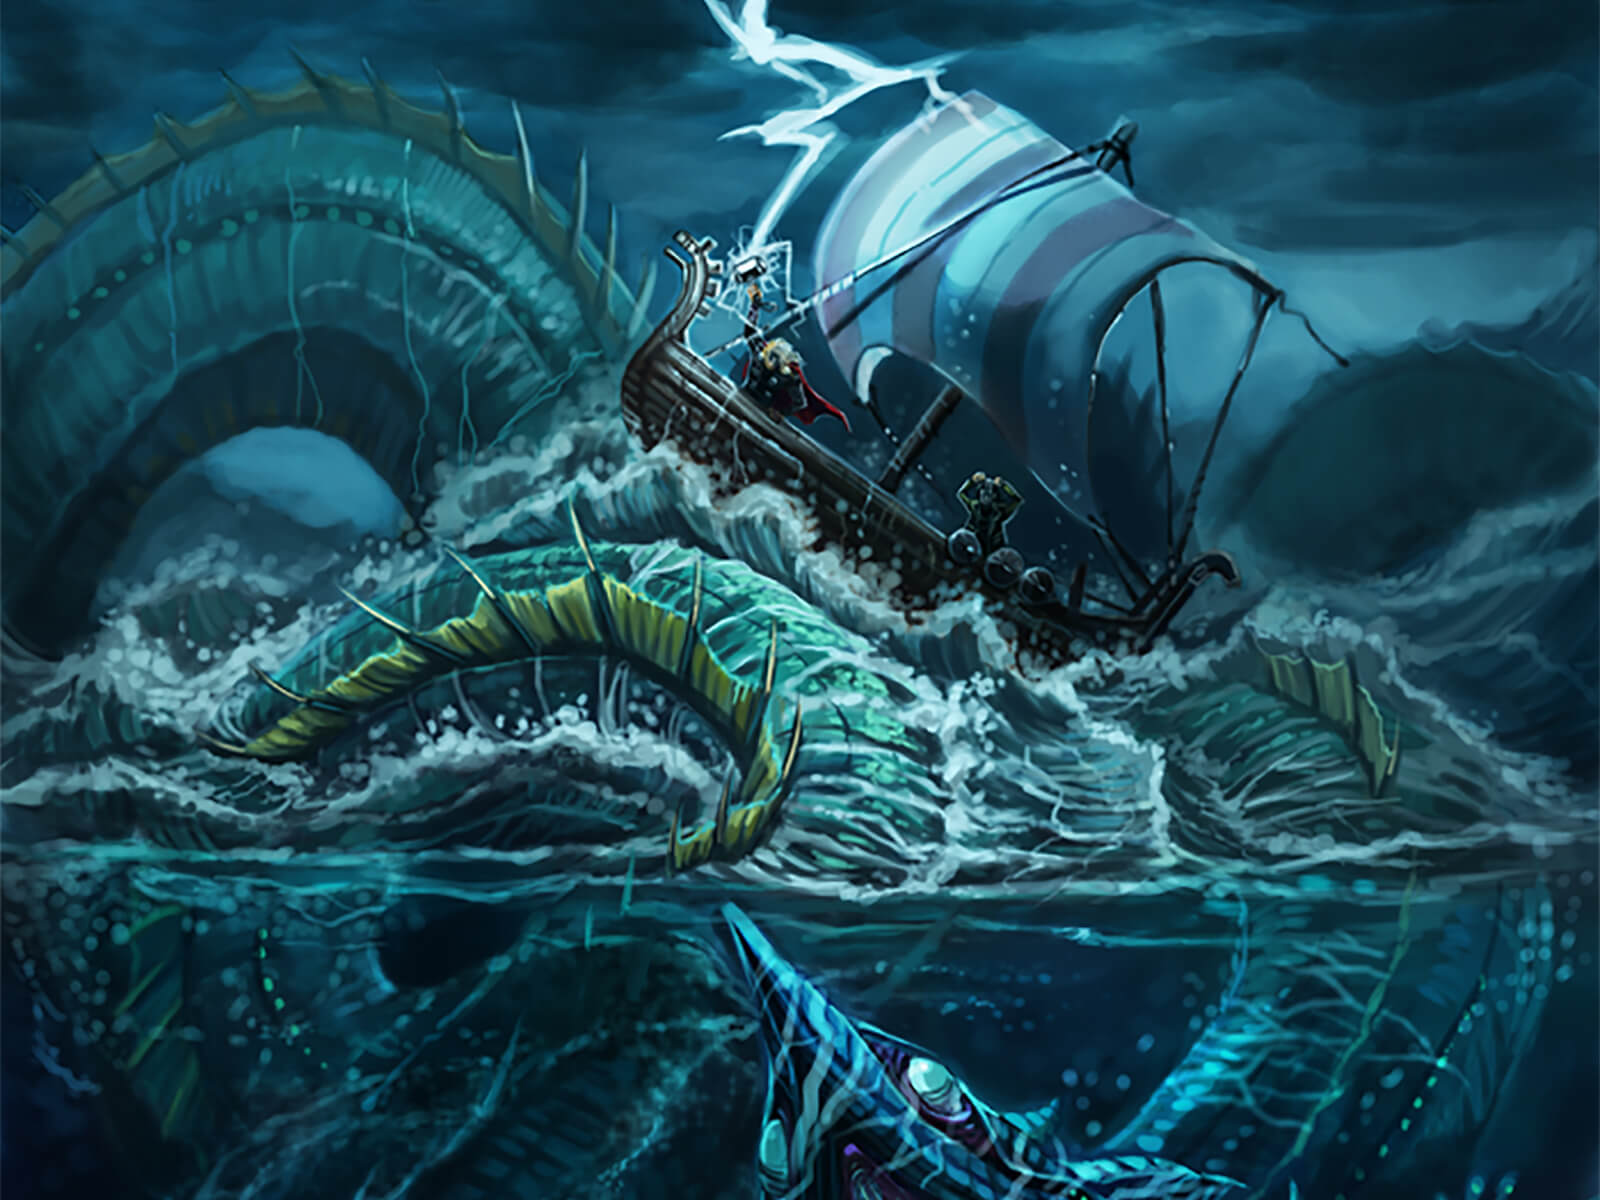 A occupant aboard a viking-style ship is struck by lightning as he is raised above the waves by a massive sea monster below.